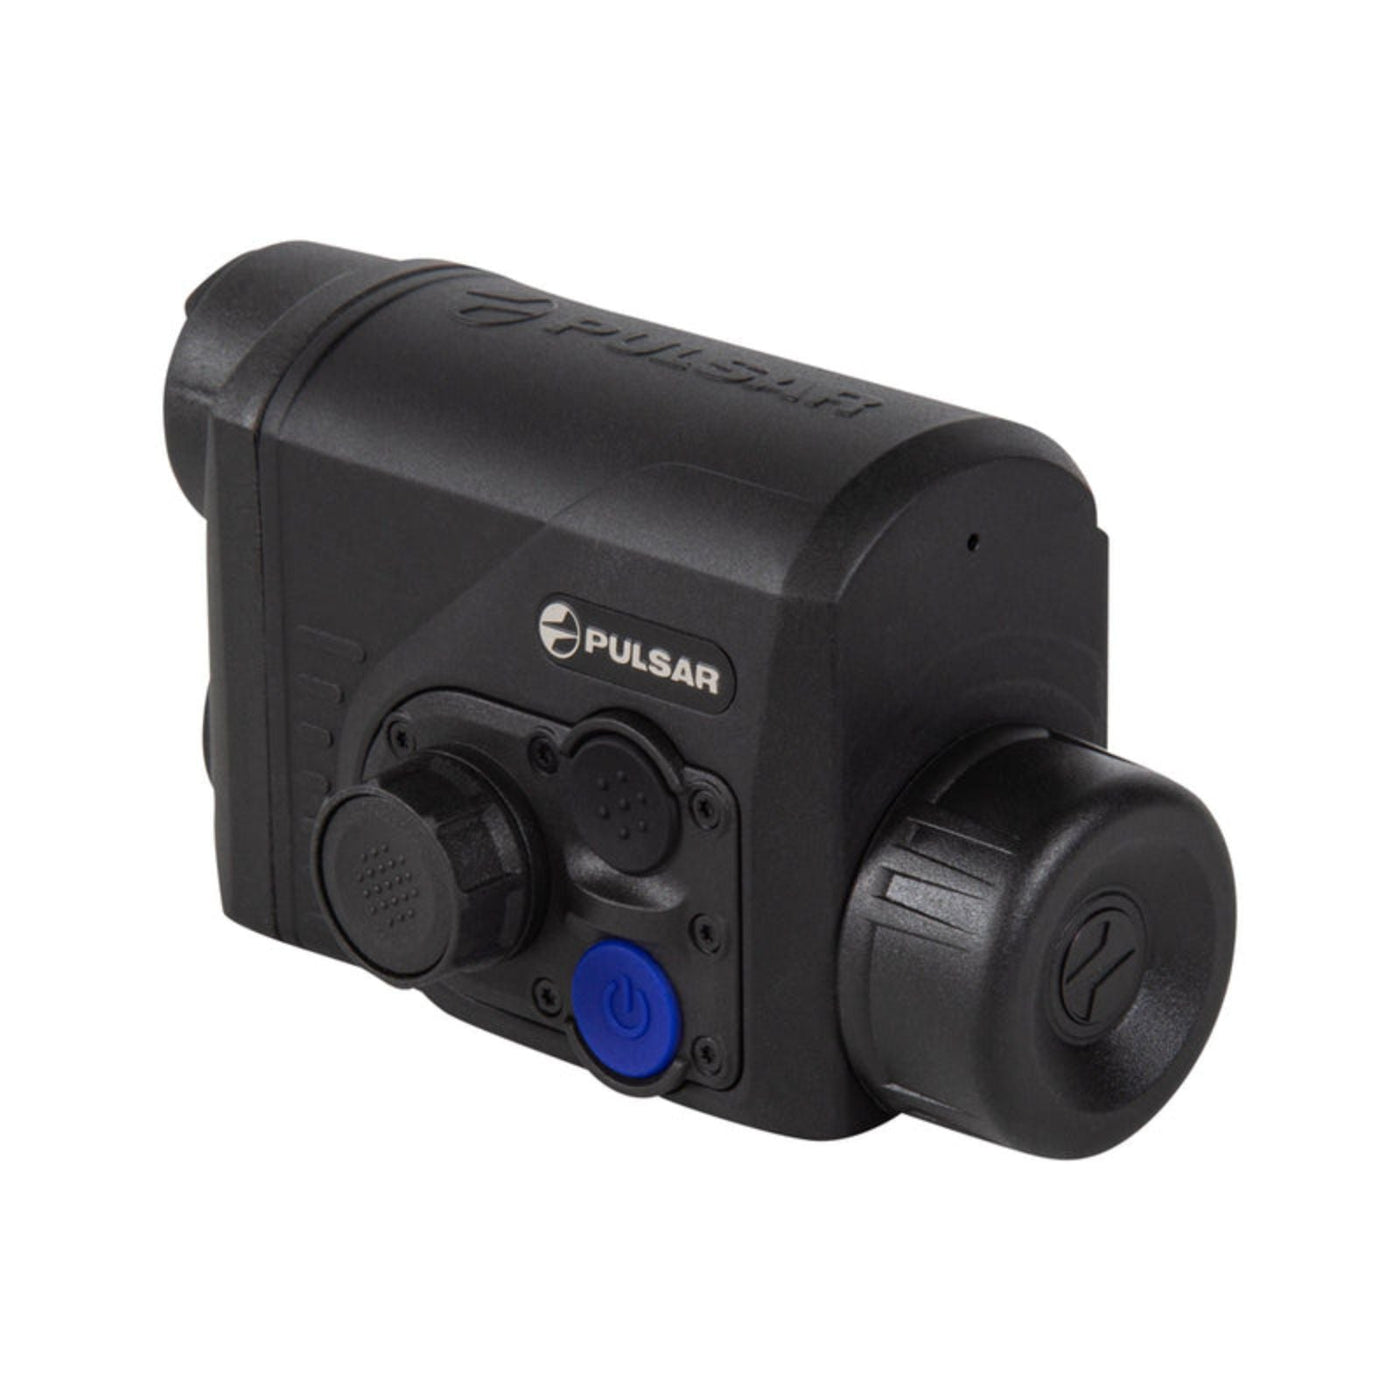 Pulsar Pulsar Thermal Imaging Front Attachment Proton FXQ30 Kit Nightvision And Thermal